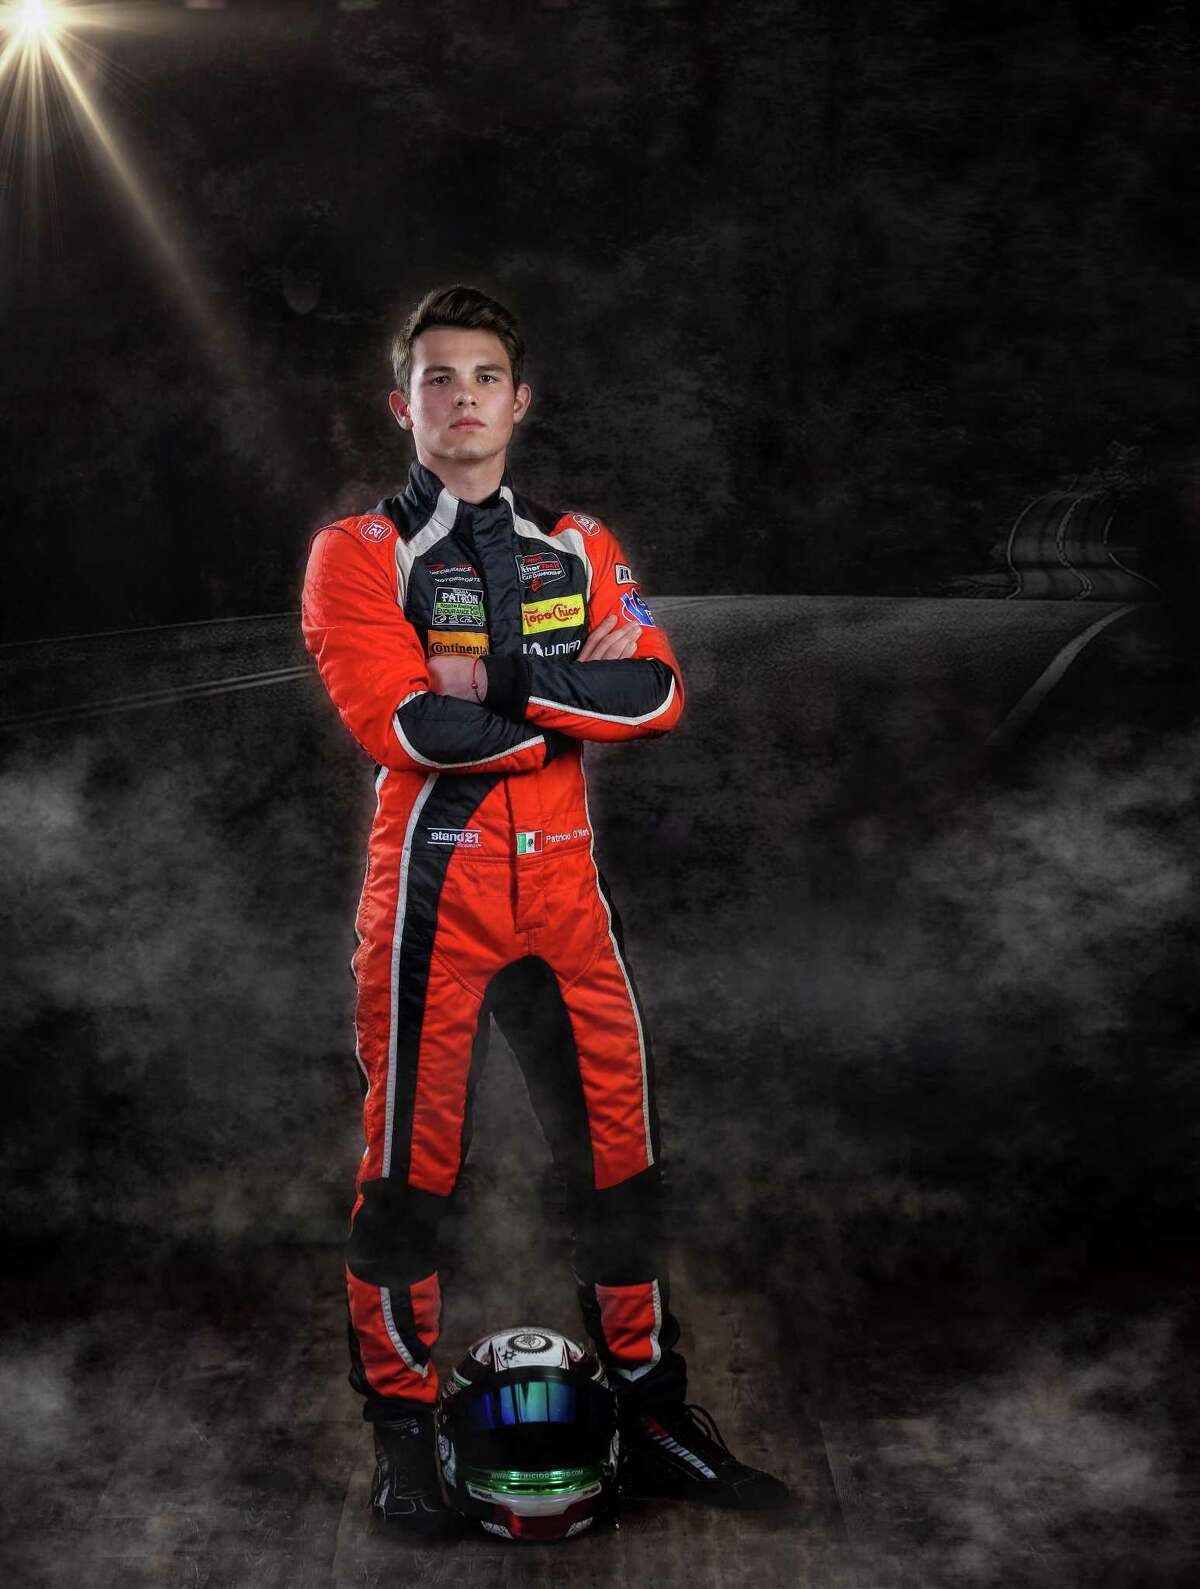 Because of safety concerns in Mexico, Patricio “Pato” O’Ward’s family moved to San Antonio when he was 11. O’Ward has since raced in Europe, in the Formula 4 series, the lowest tier of F1 racing, in 2014. He moved to the Pro-Mazda series, the lowest tier on the IndyCar circuit in 2015.